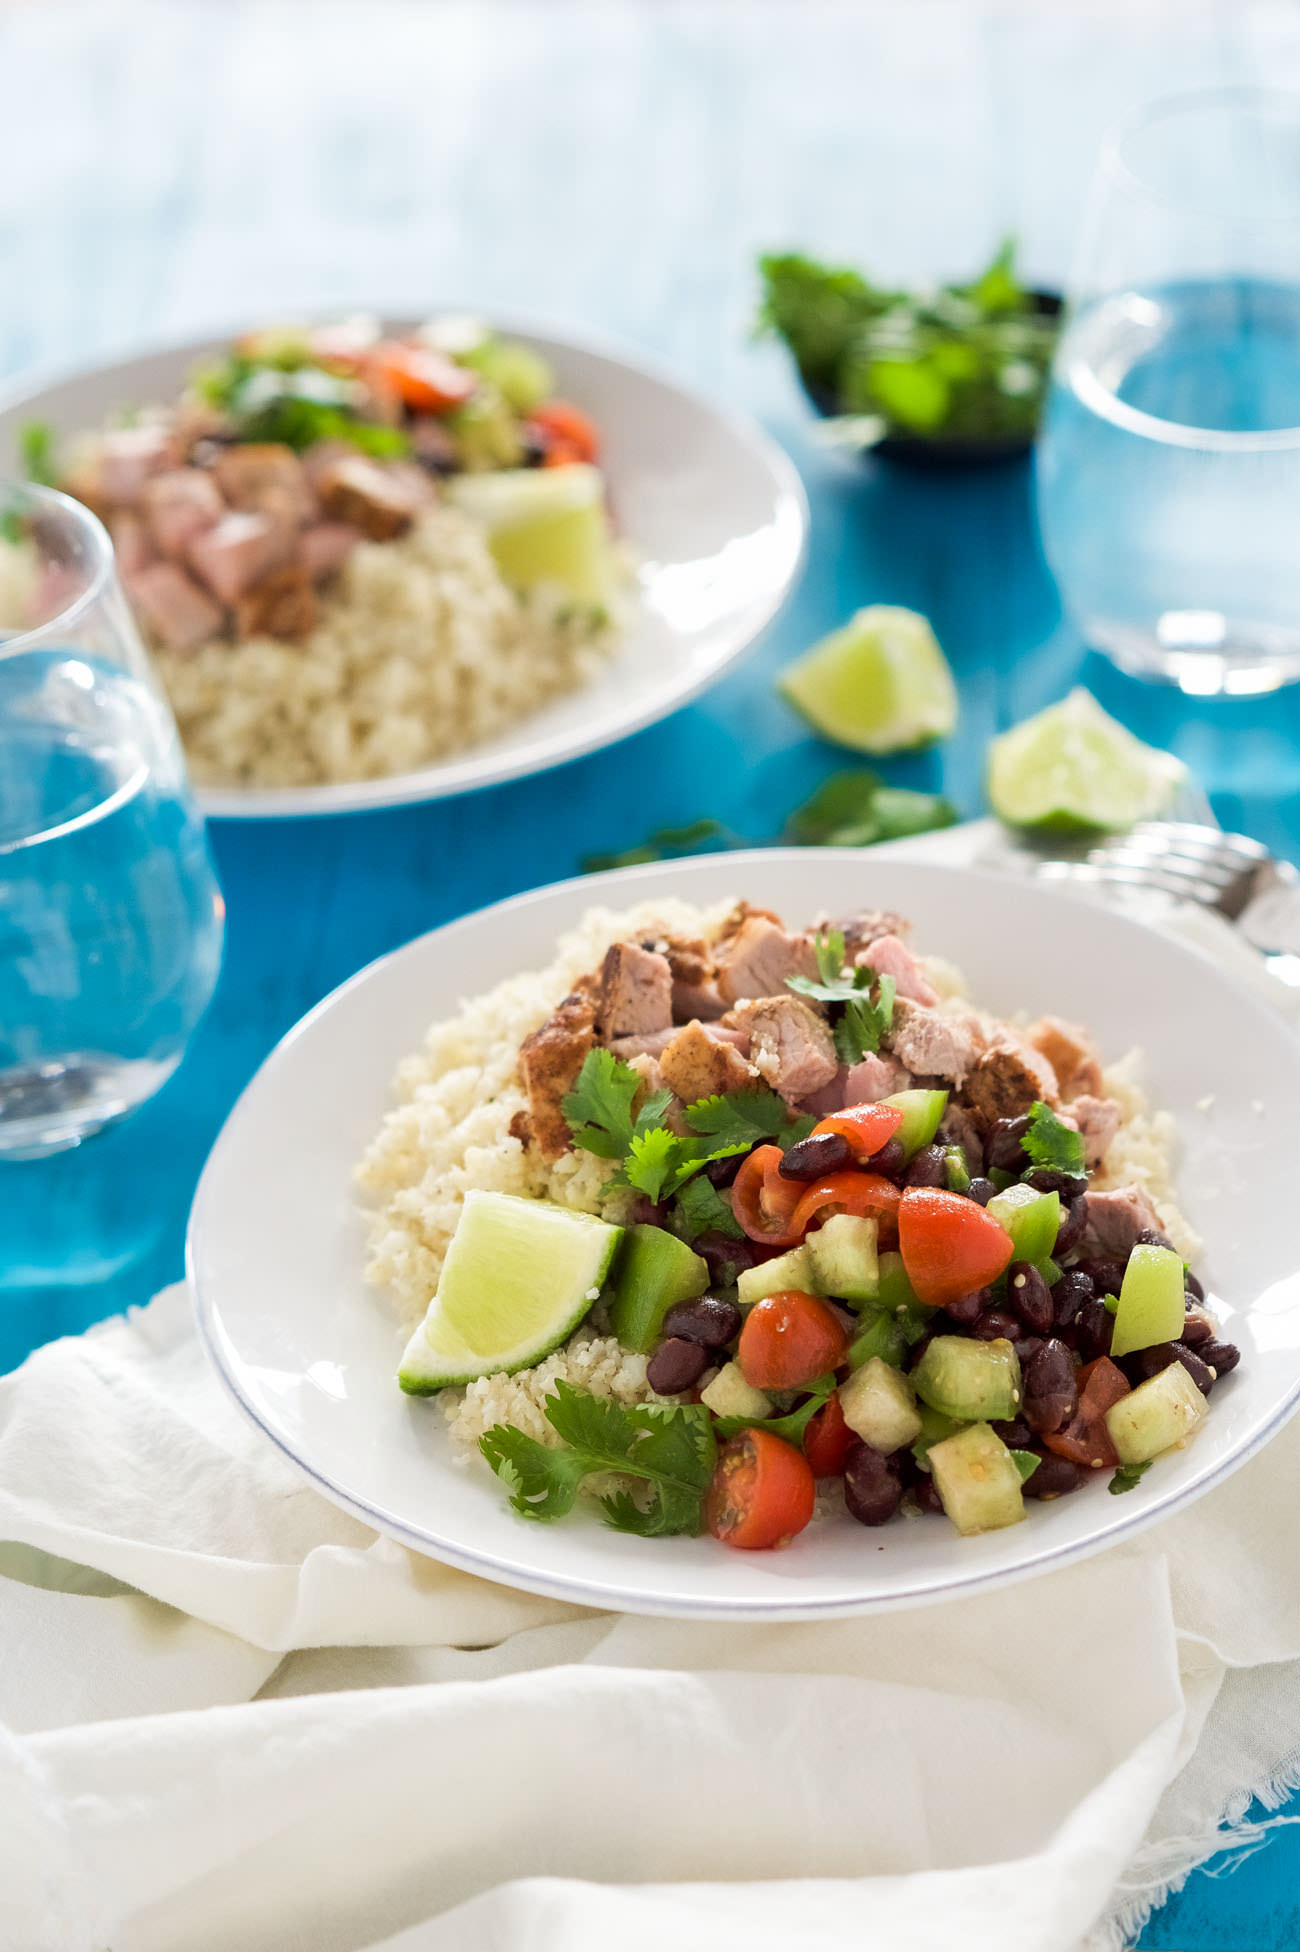 Chipotle Pork Carnita Burrito Bowls with Cumin Lime Rice are a healthy, homemade tex mex favorite! Filled with juicy, spiced pork, a homemade black bean salsa and lightened up cumin lime cauliflower rice!